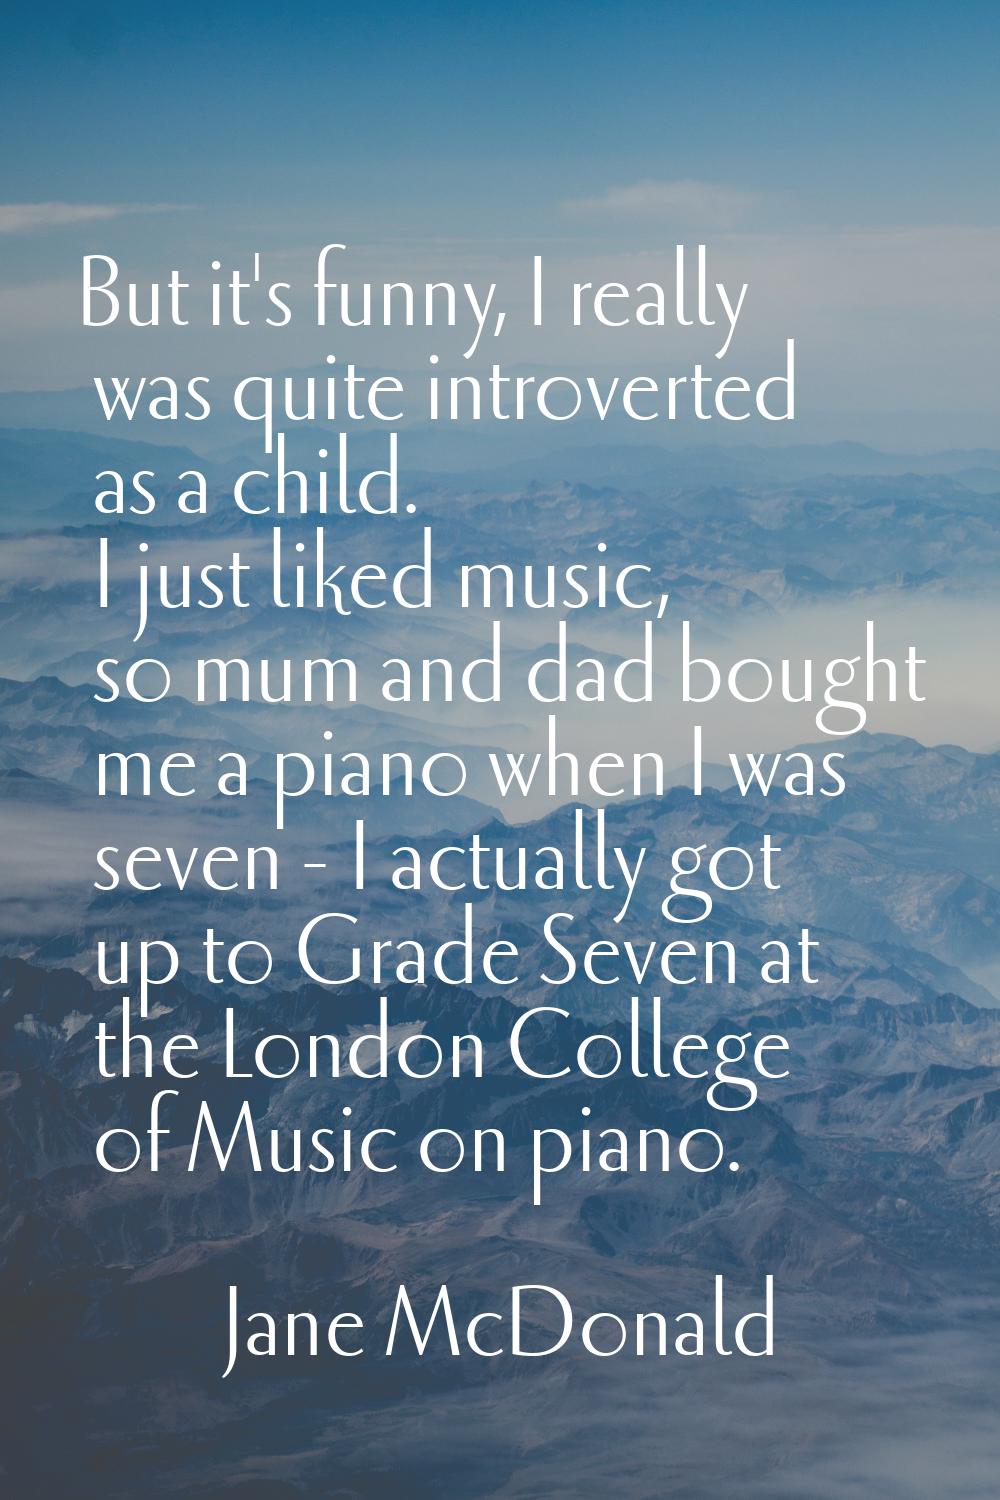 But it's funny, I really was quite introverted as a child. I just liked music, so mum and dad bough